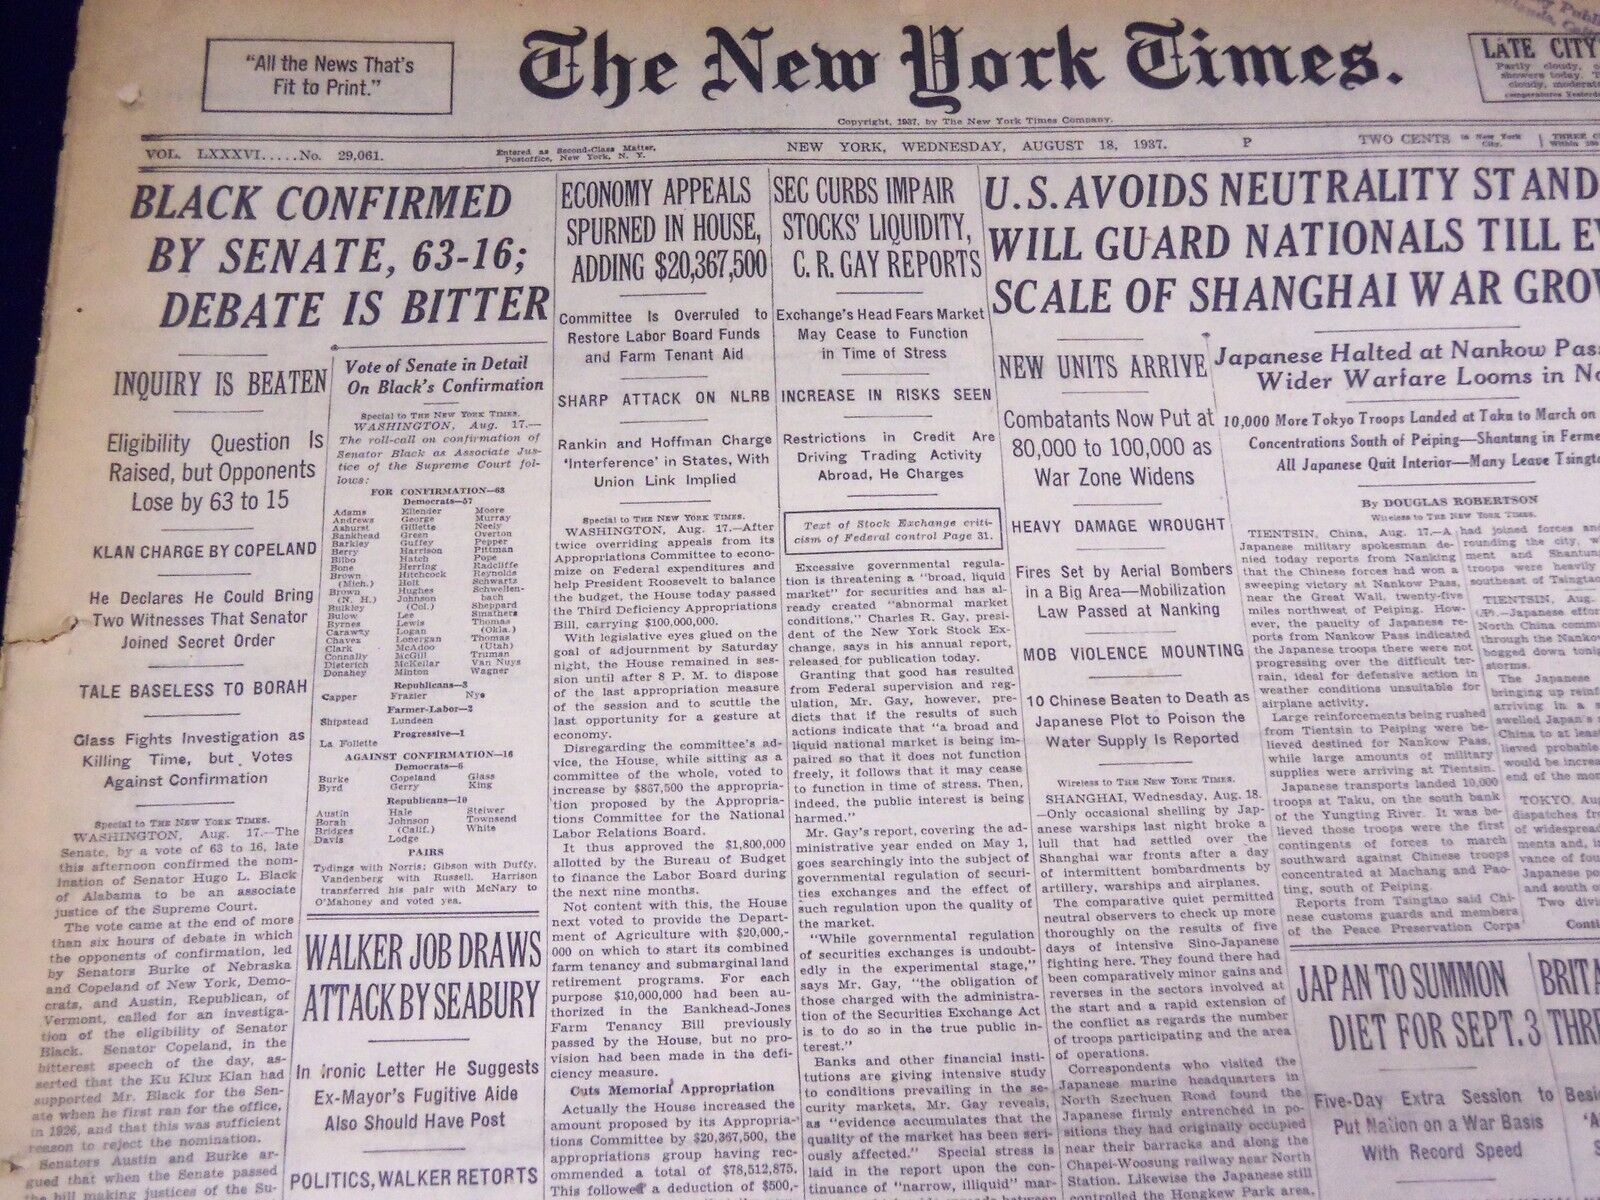 1937 AUGUST 18 NEW YORK TIMES - BLACK CONFIRMED BY SENATE 63-16 - NT 3025